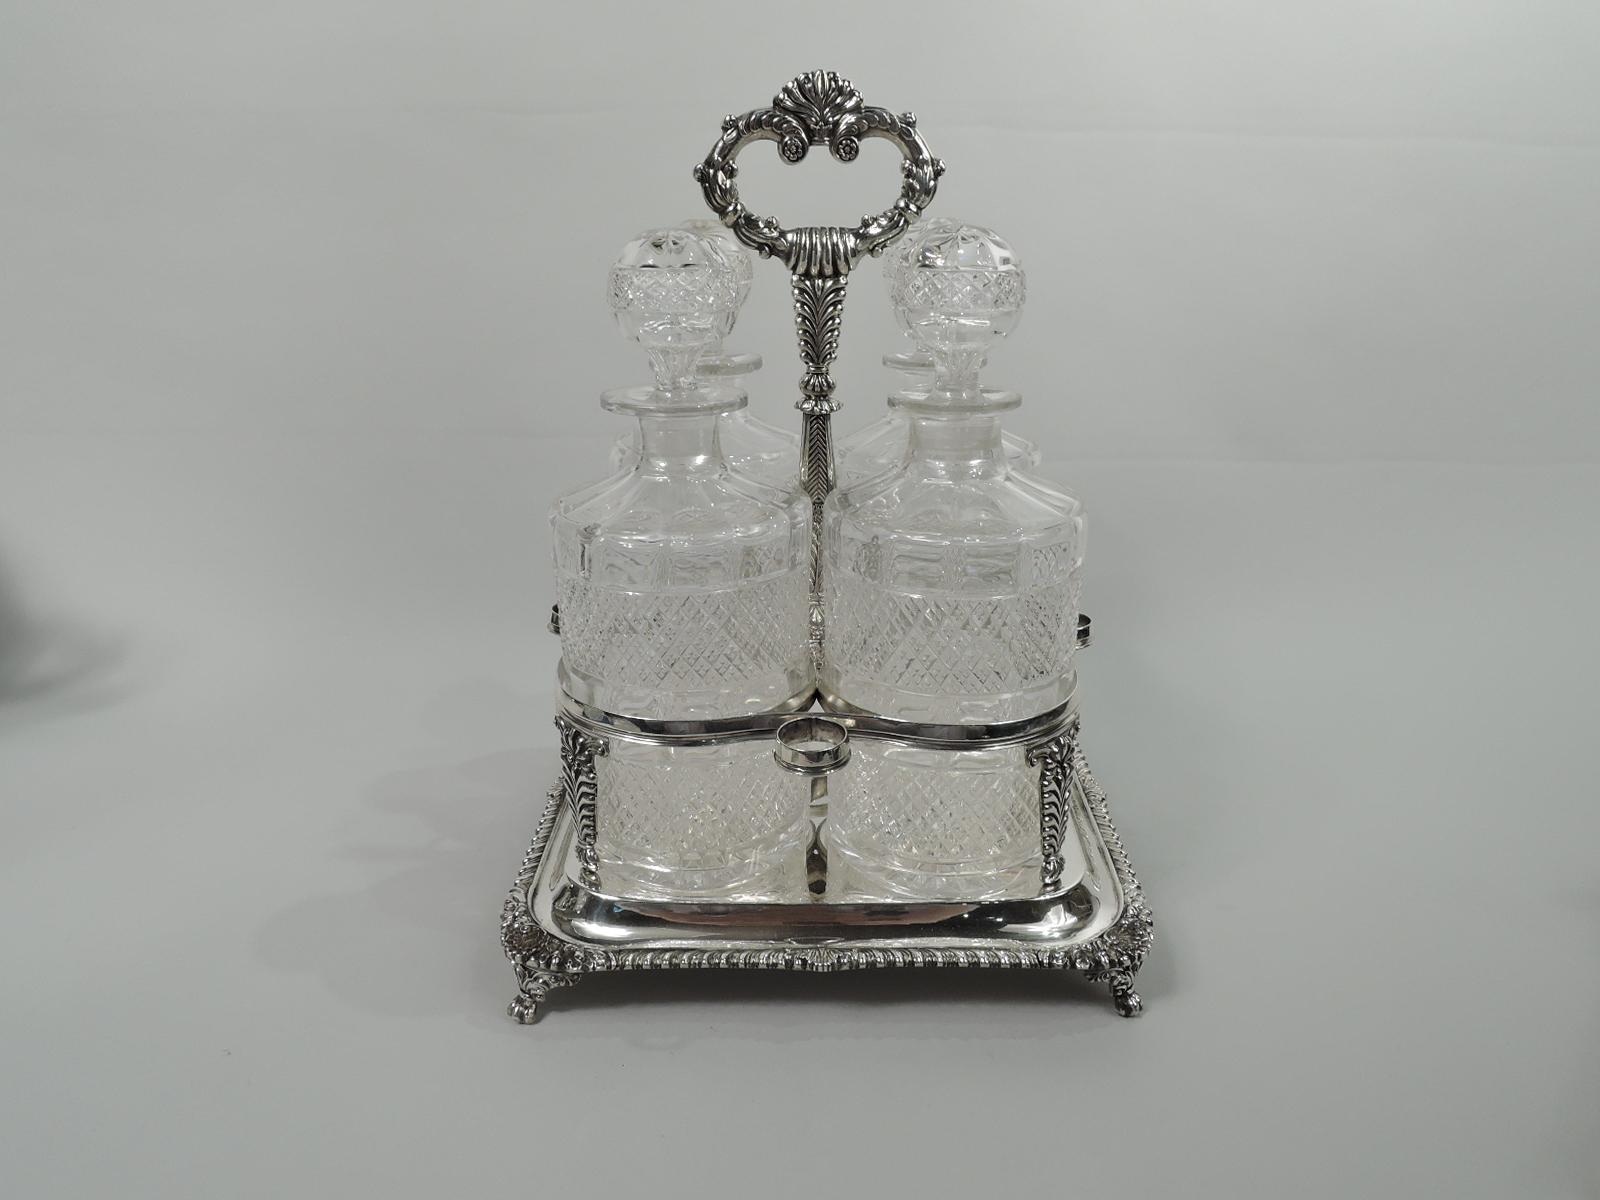 English Georgian neoclassical sterling silver decanter stand, 1818. Raised square base with gadrooned rim. Corner shells between oak leaves and acorns on leaf- and scroll-mounted paw supports. Four bottle and 4 stopper rings on imbricated leaf